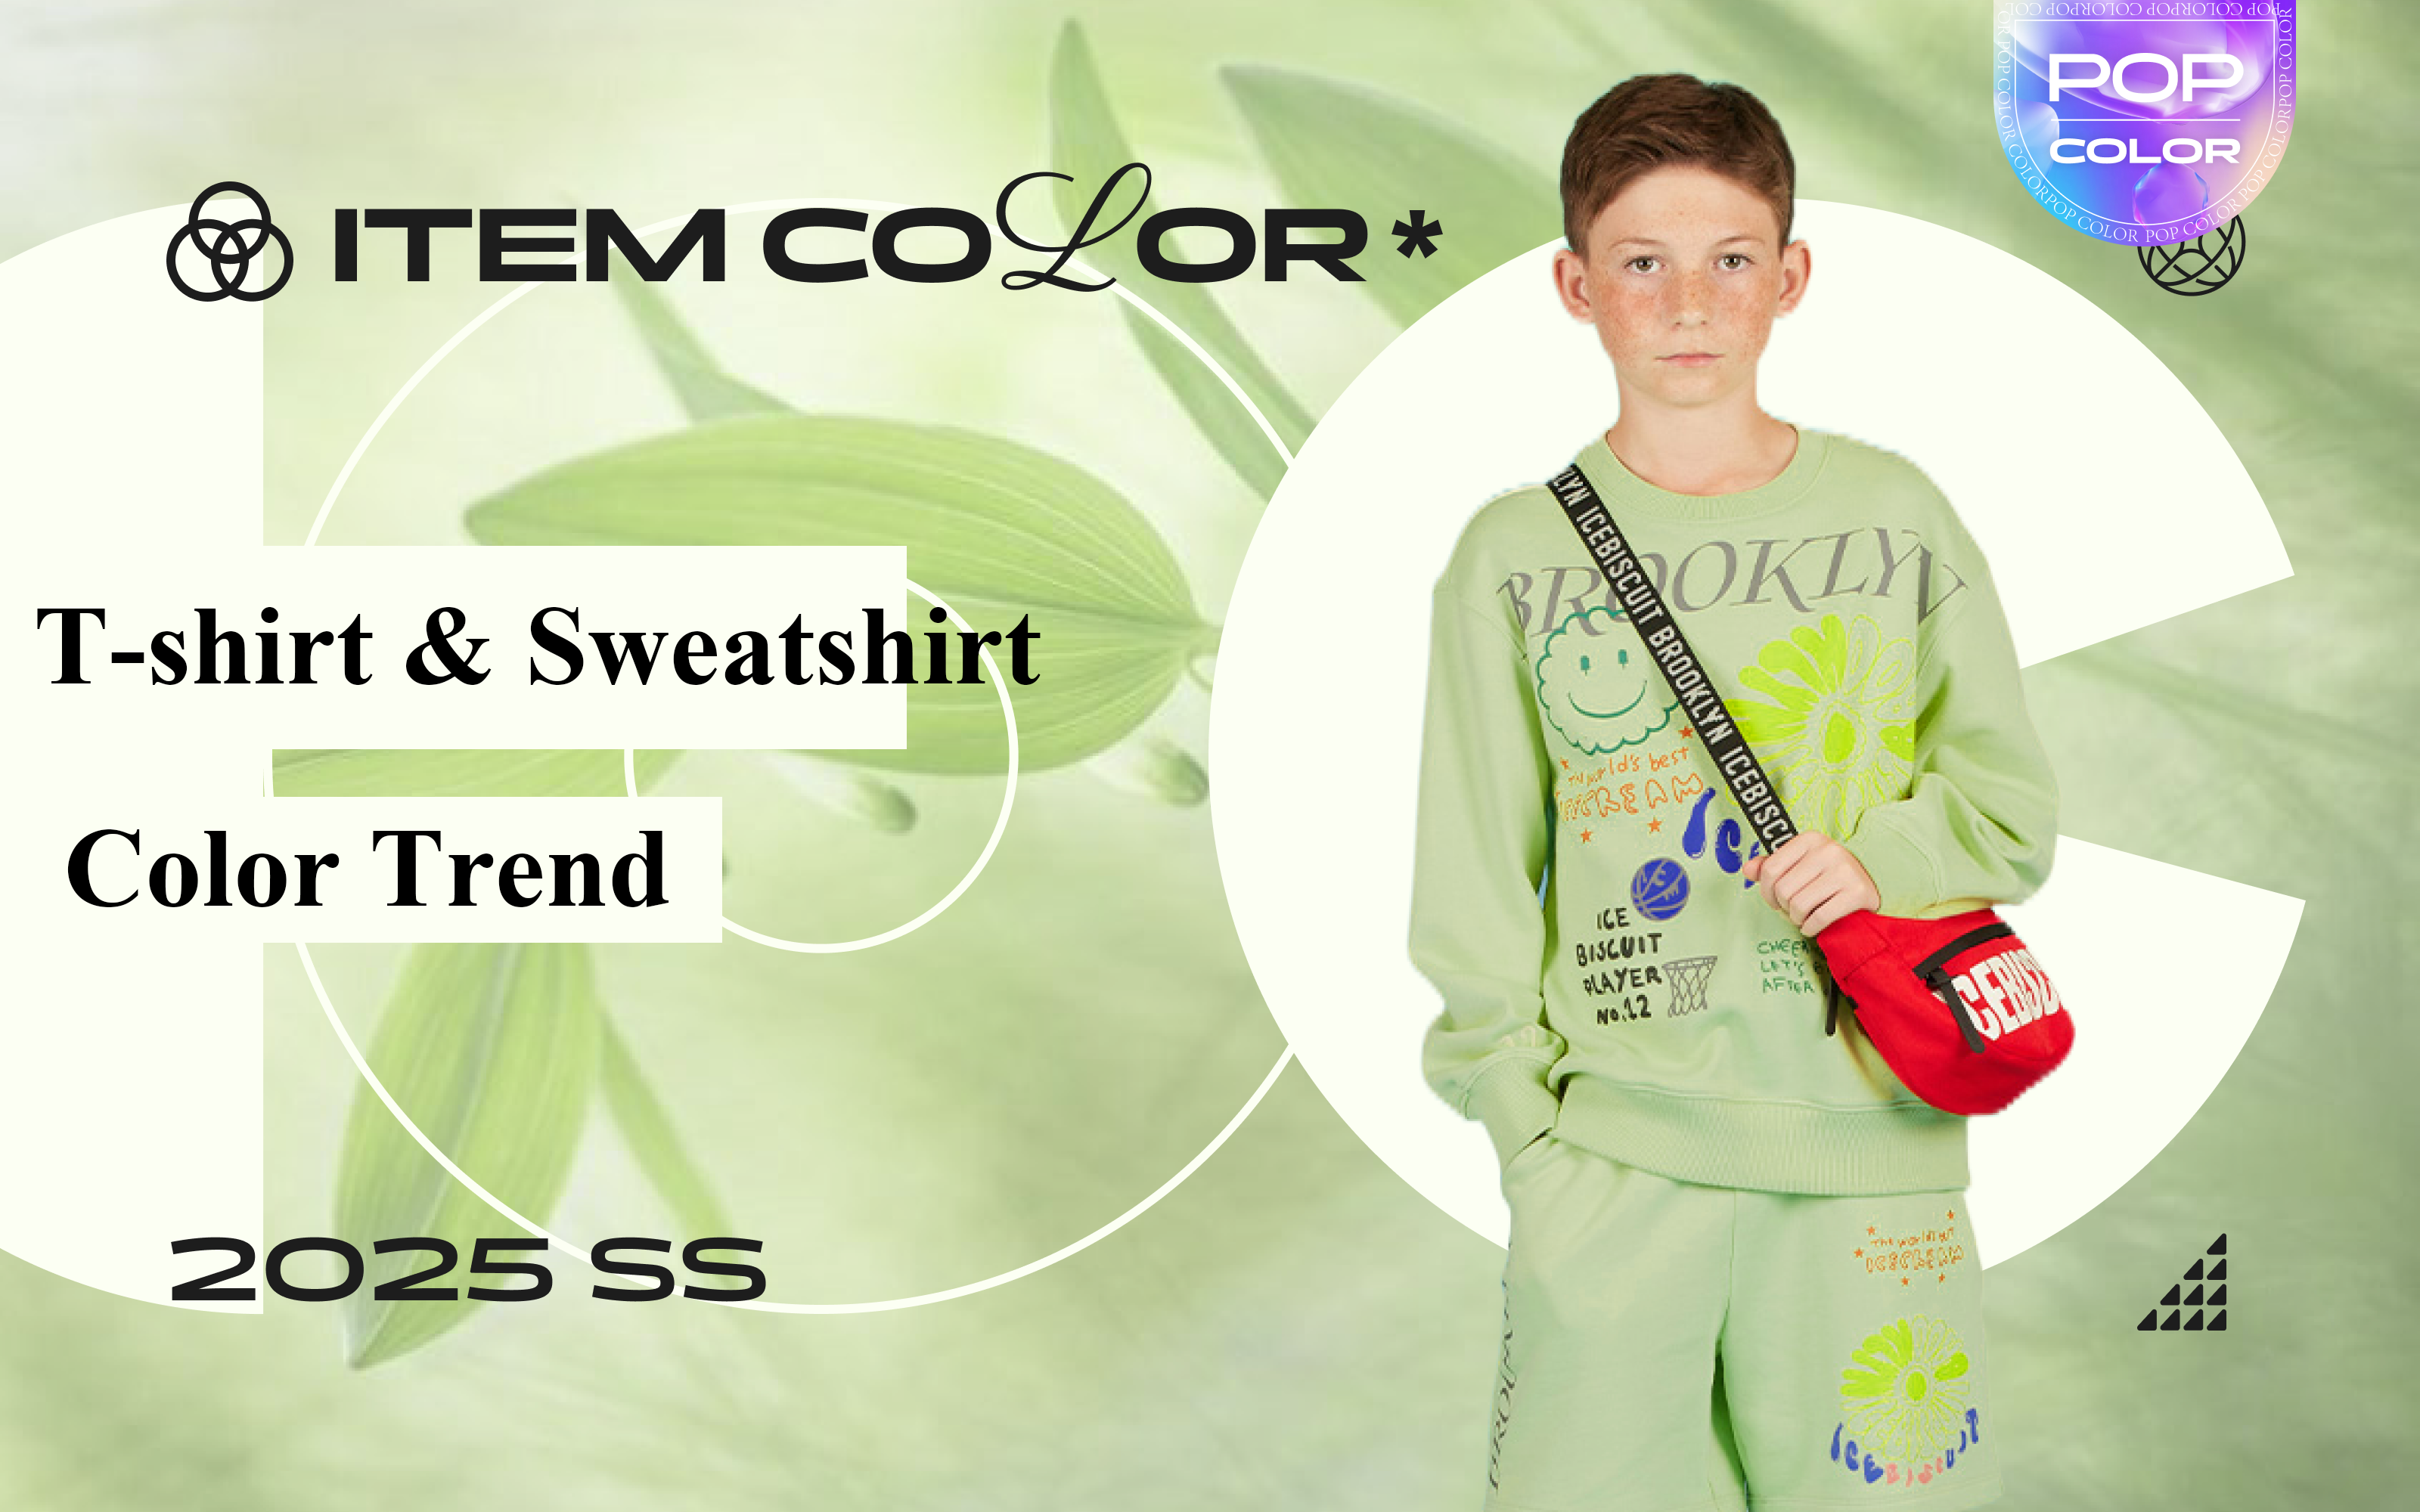 T-shirt/Sweatshirt -- The Color Trend for Kidswear